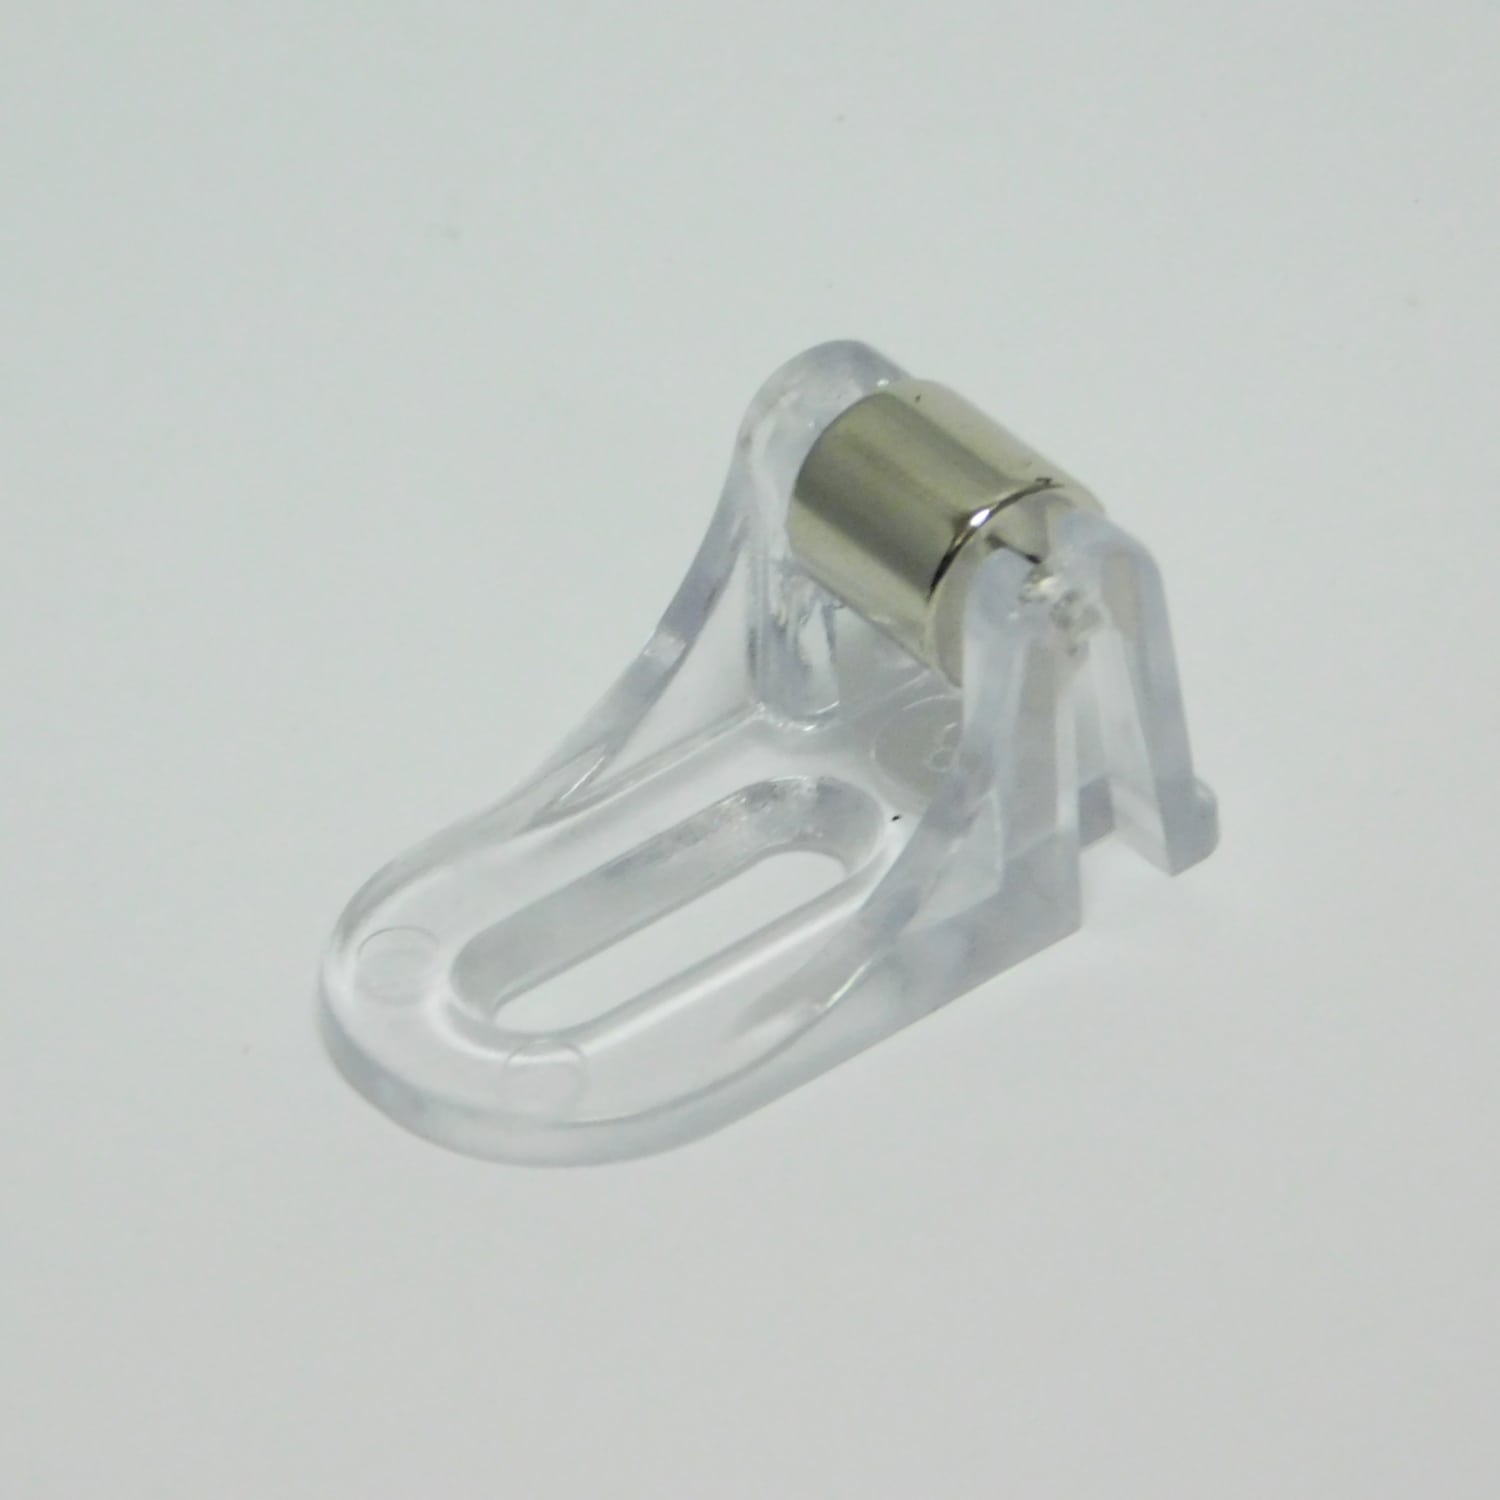 NEW PLASTIC CHAIN TIE DOWN CHILD SAFETY CLIP FOR ROLLER HOLLAND VERTICAL BLINDS 